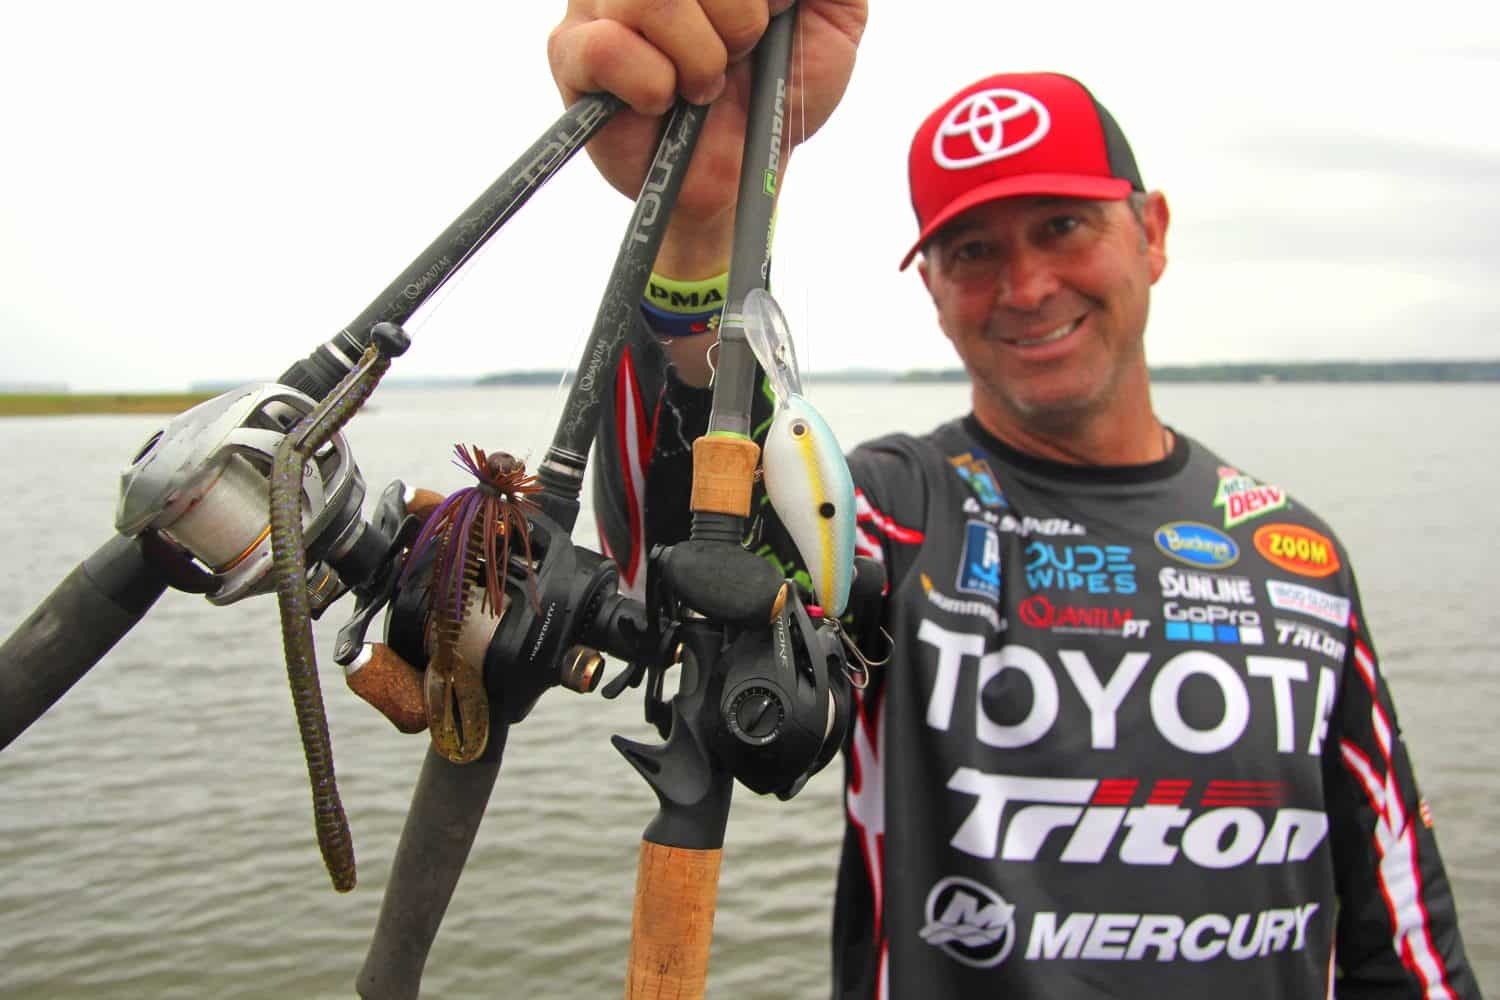 3 Lures Gerald Swindle Chooses for the Start of Summer – Anglers